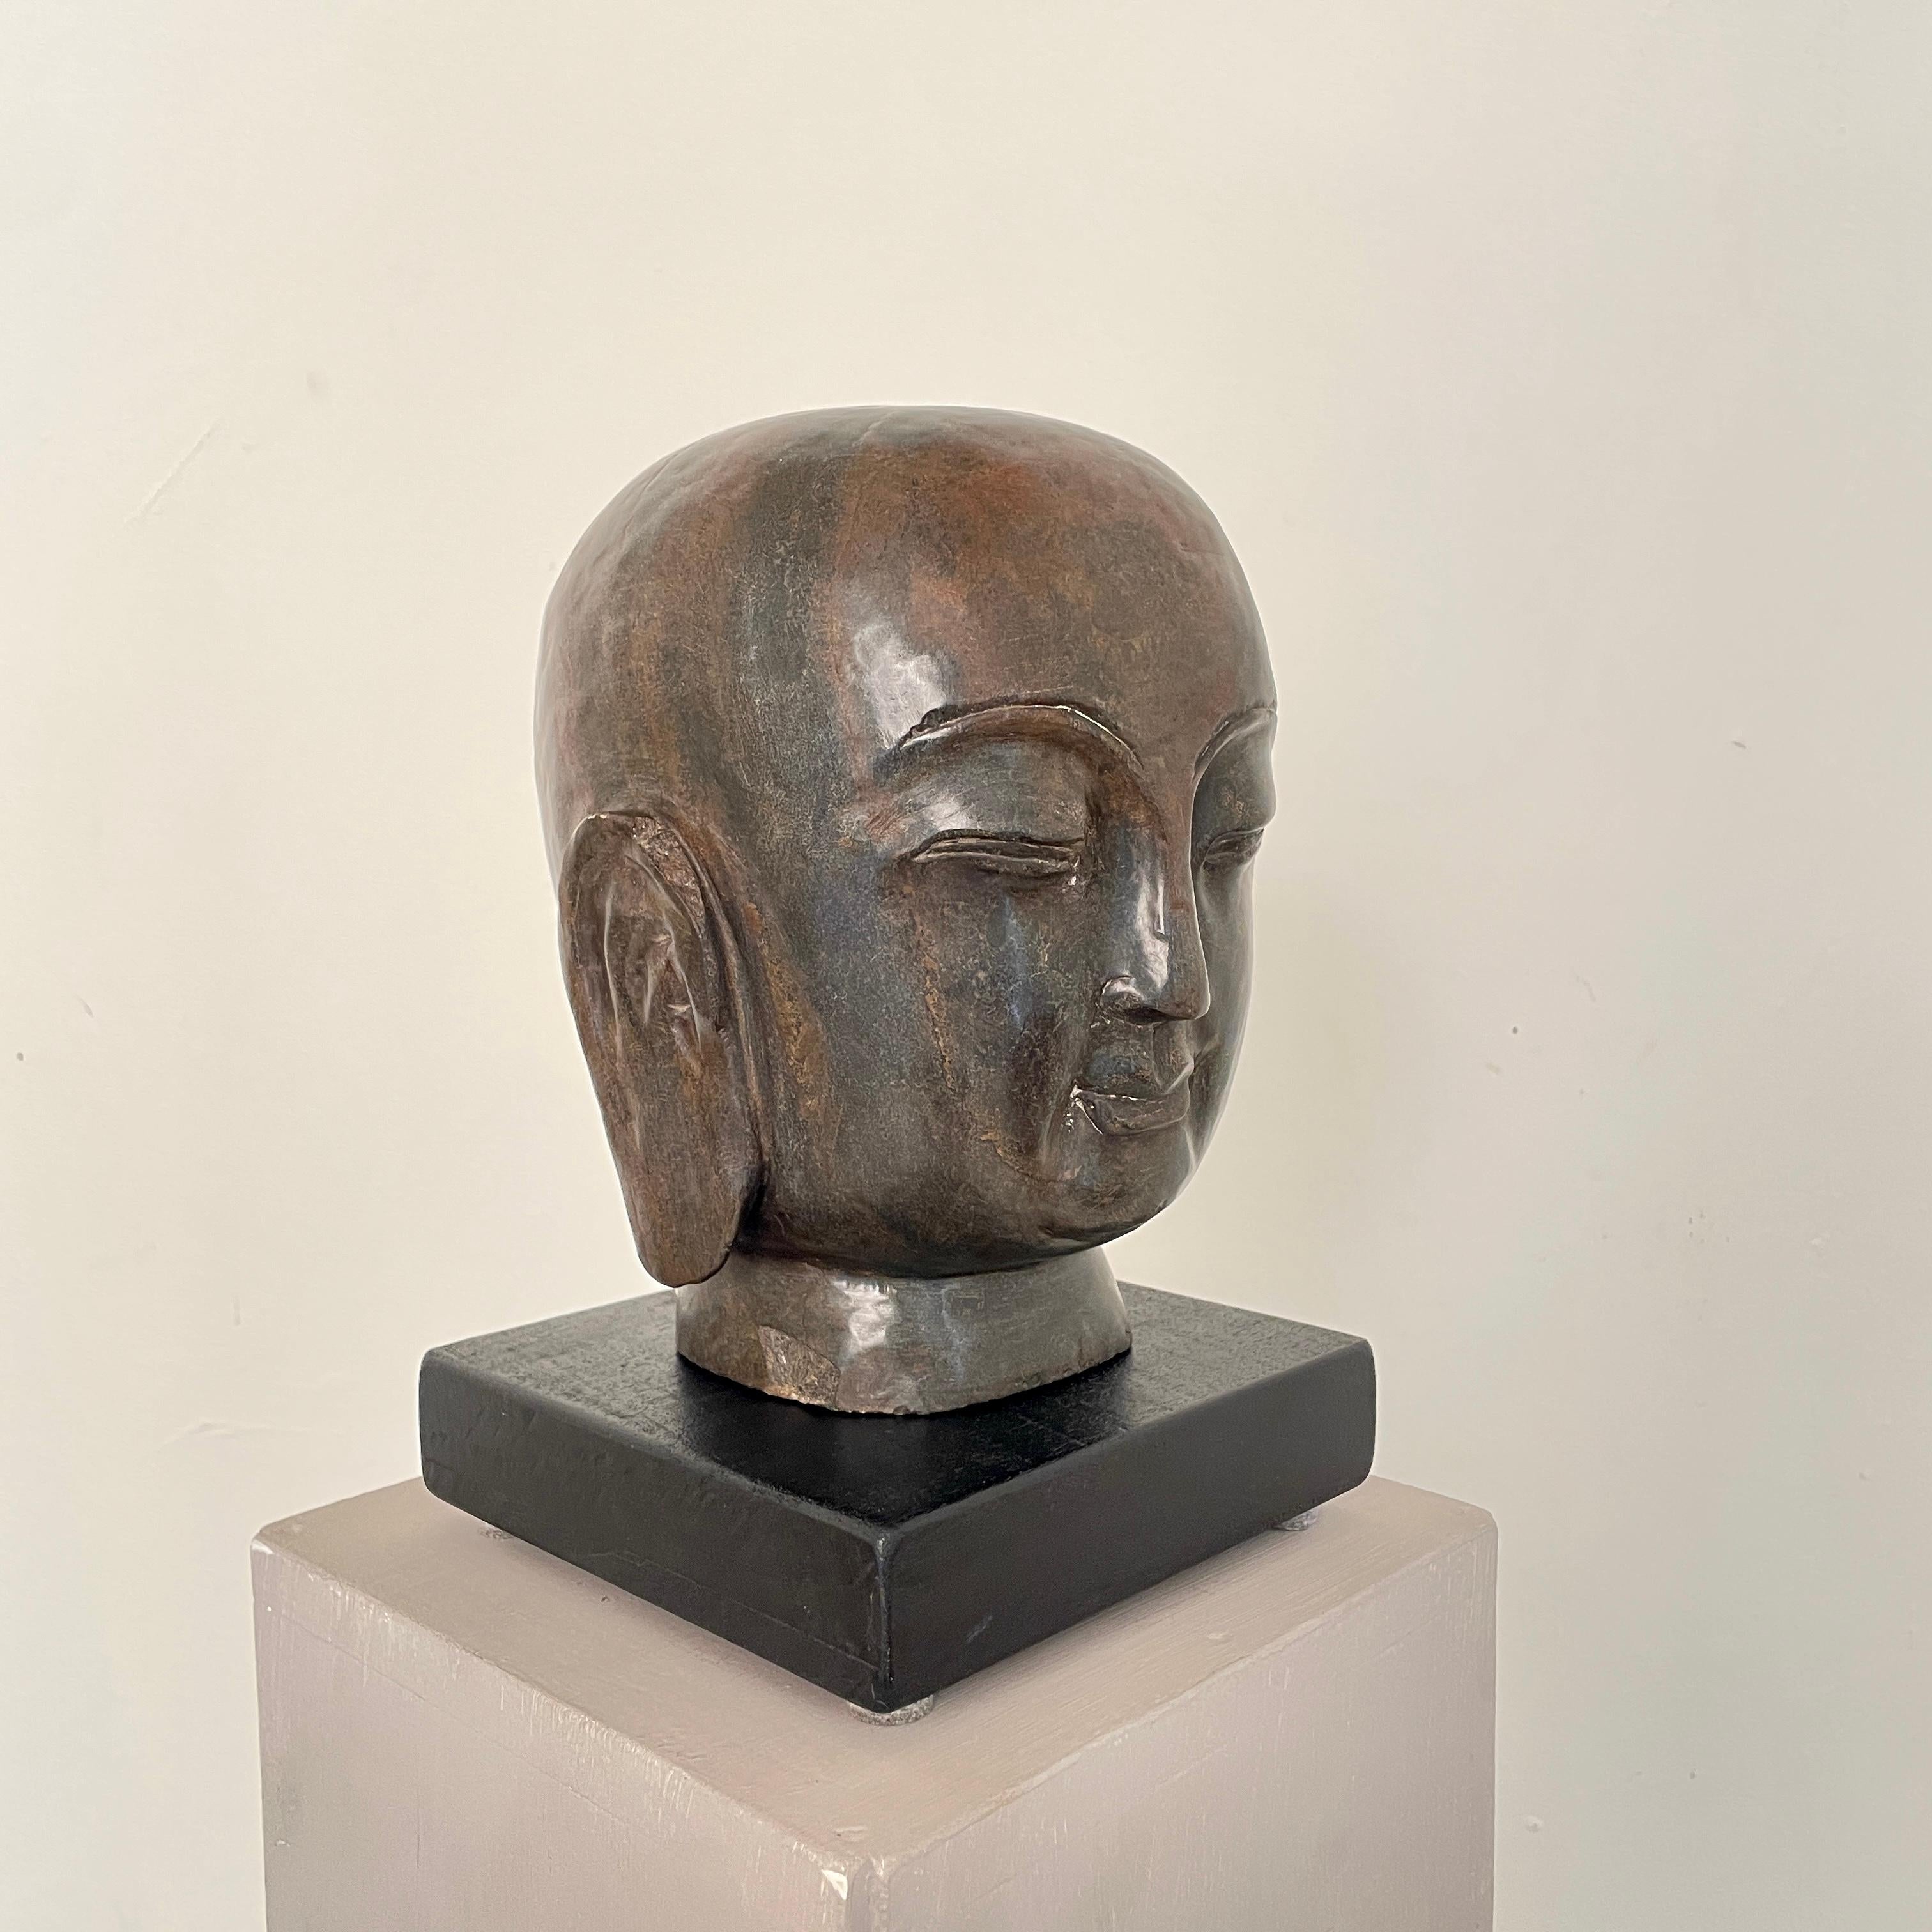 Beautiful Early 20th Century Chinese Buddha Stone Head made around 1920.
This chinese carved head of Buddha was sensitively molded off limestone. The head looks out from heavily almond shaped eyes, under high arched browns, his full lips pursed in a